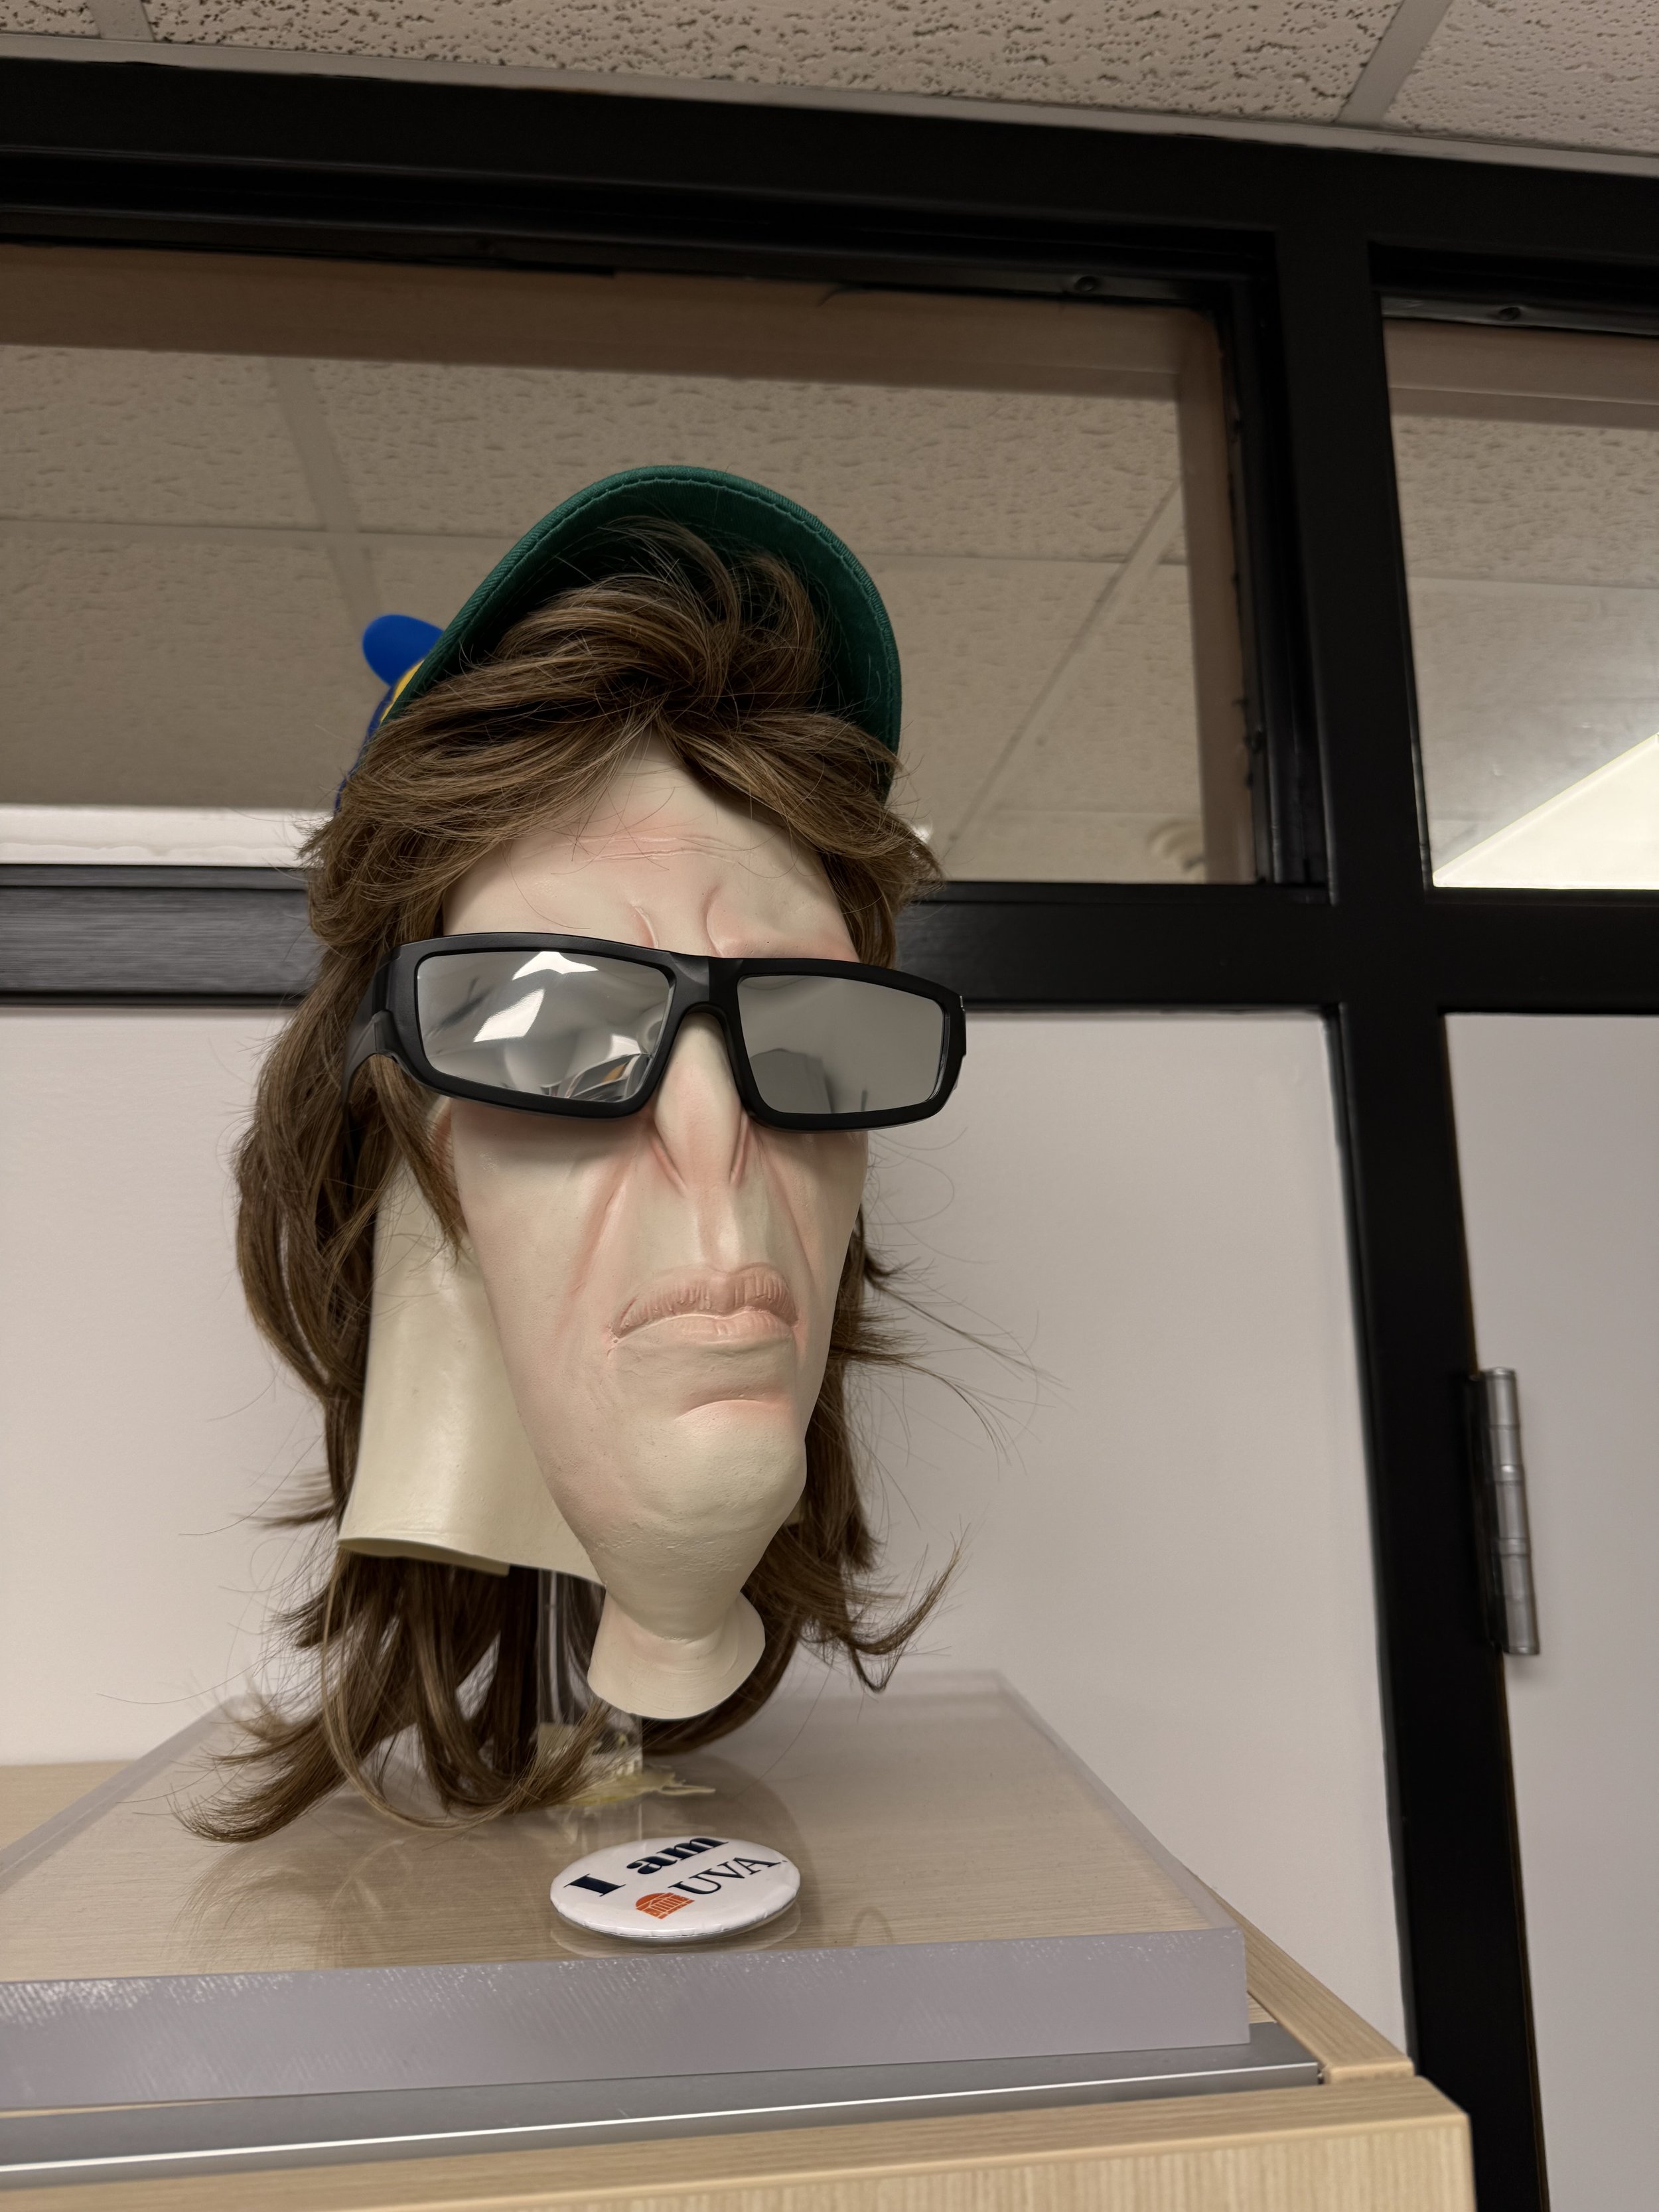 Even creepy mullet voldemort wore proper eye protection